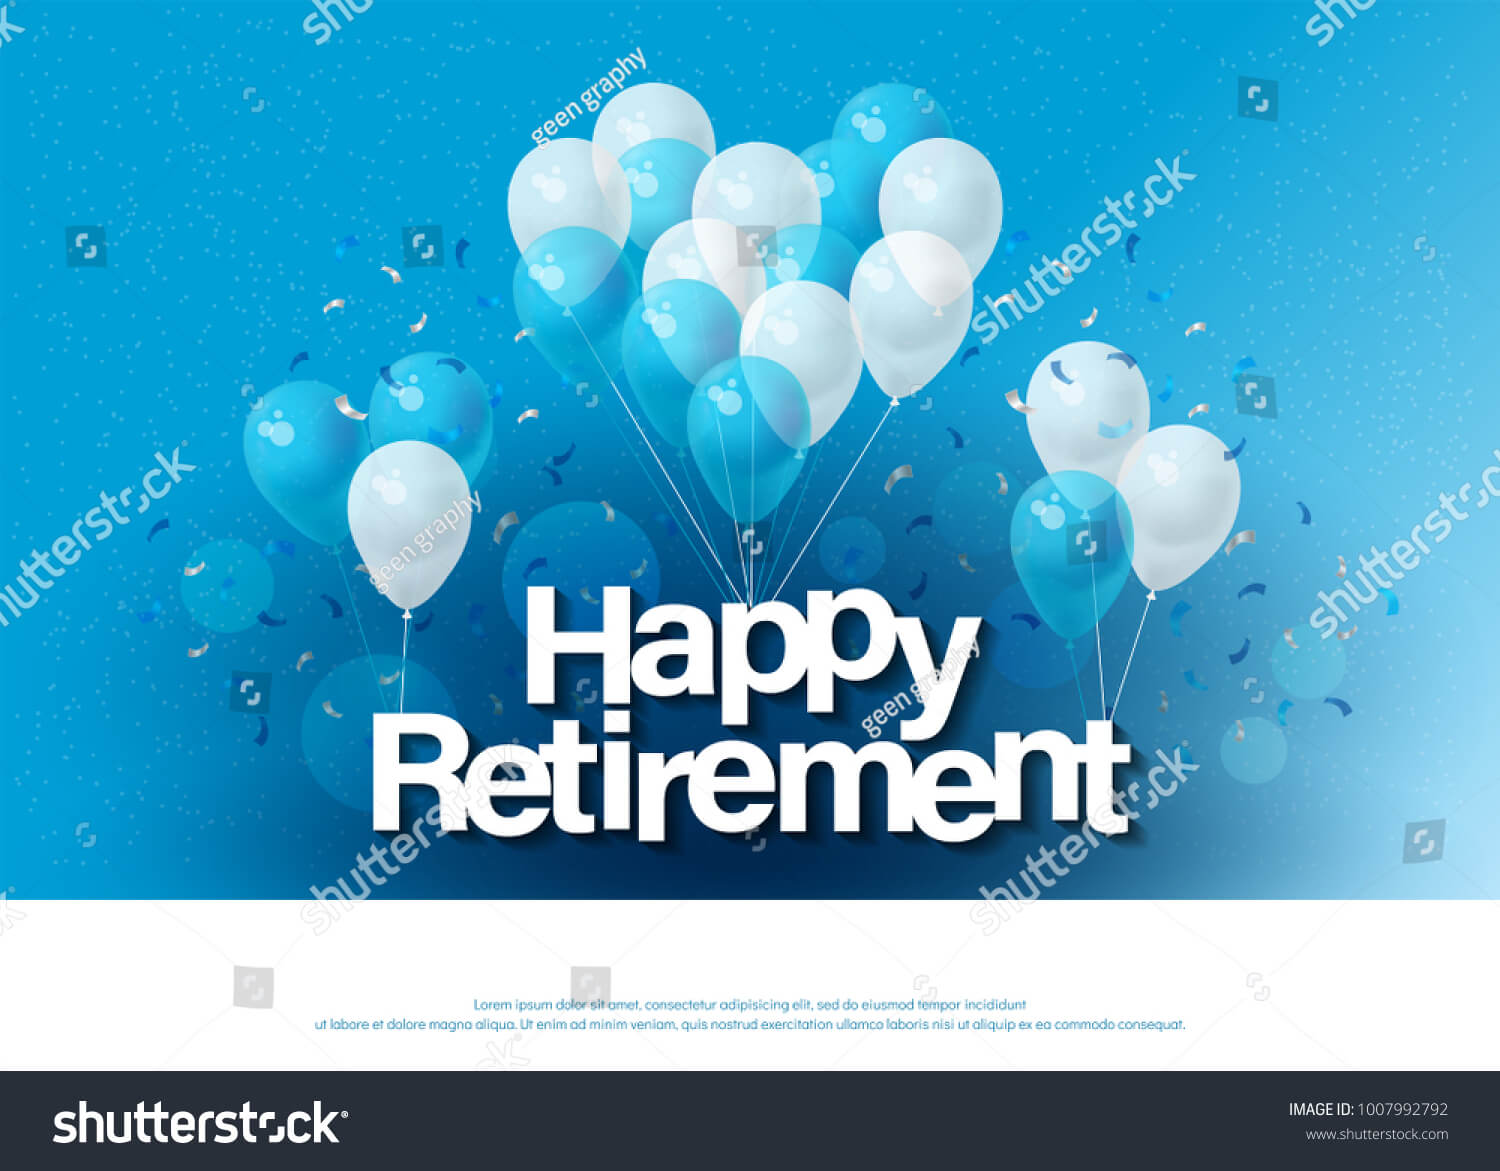 Happy Retirement Greeting Card Lettering Template Stock Inside Retirement Card Template